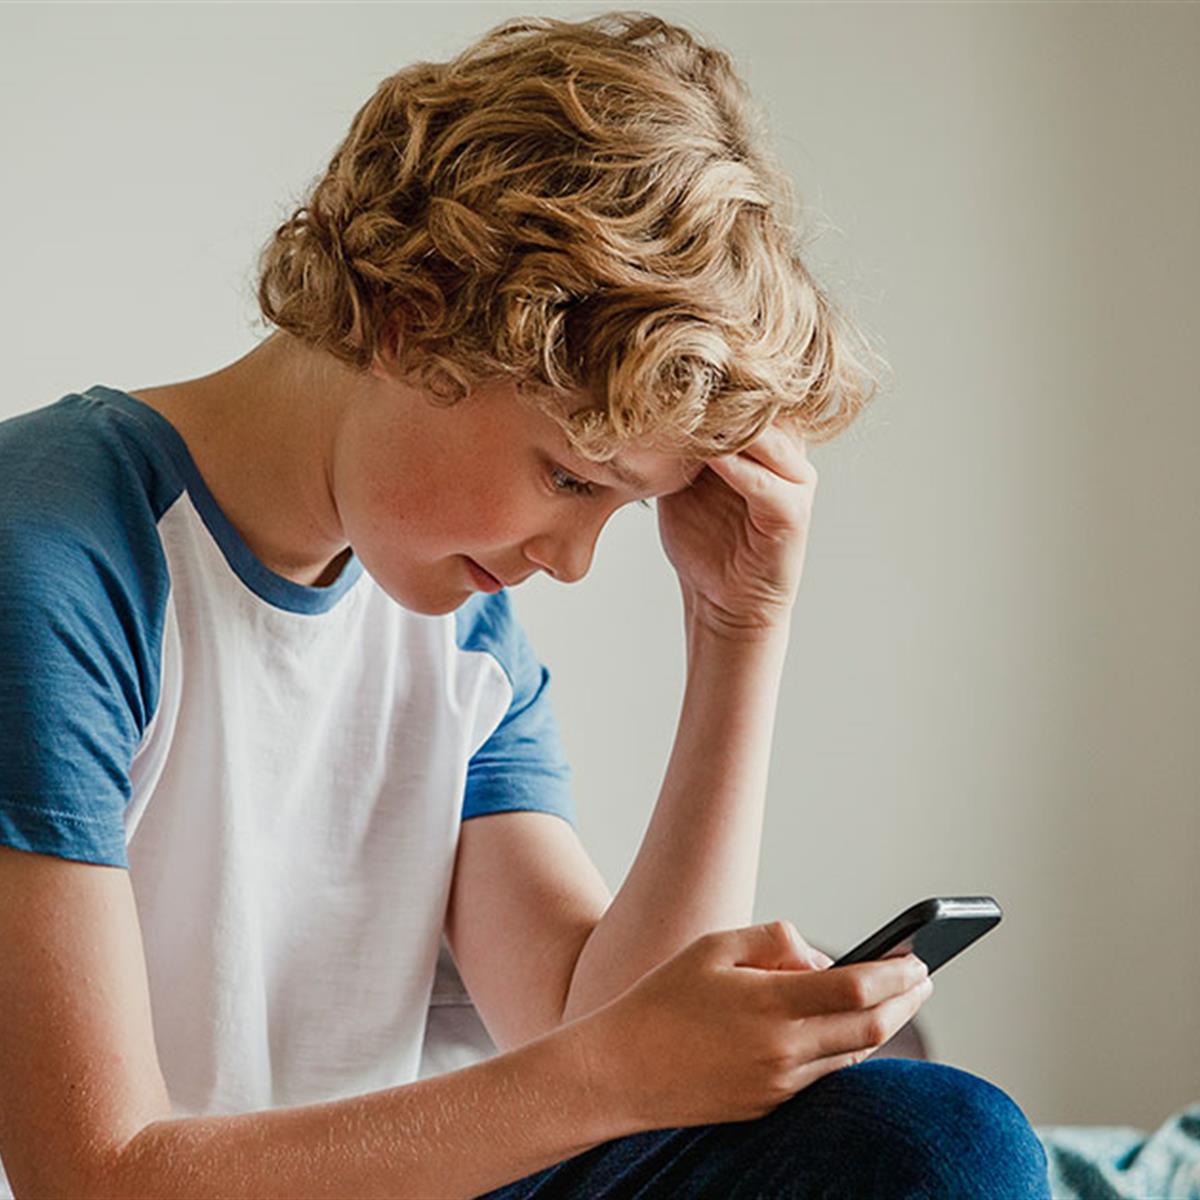 What do teens need to know about sextortion & online predators? 